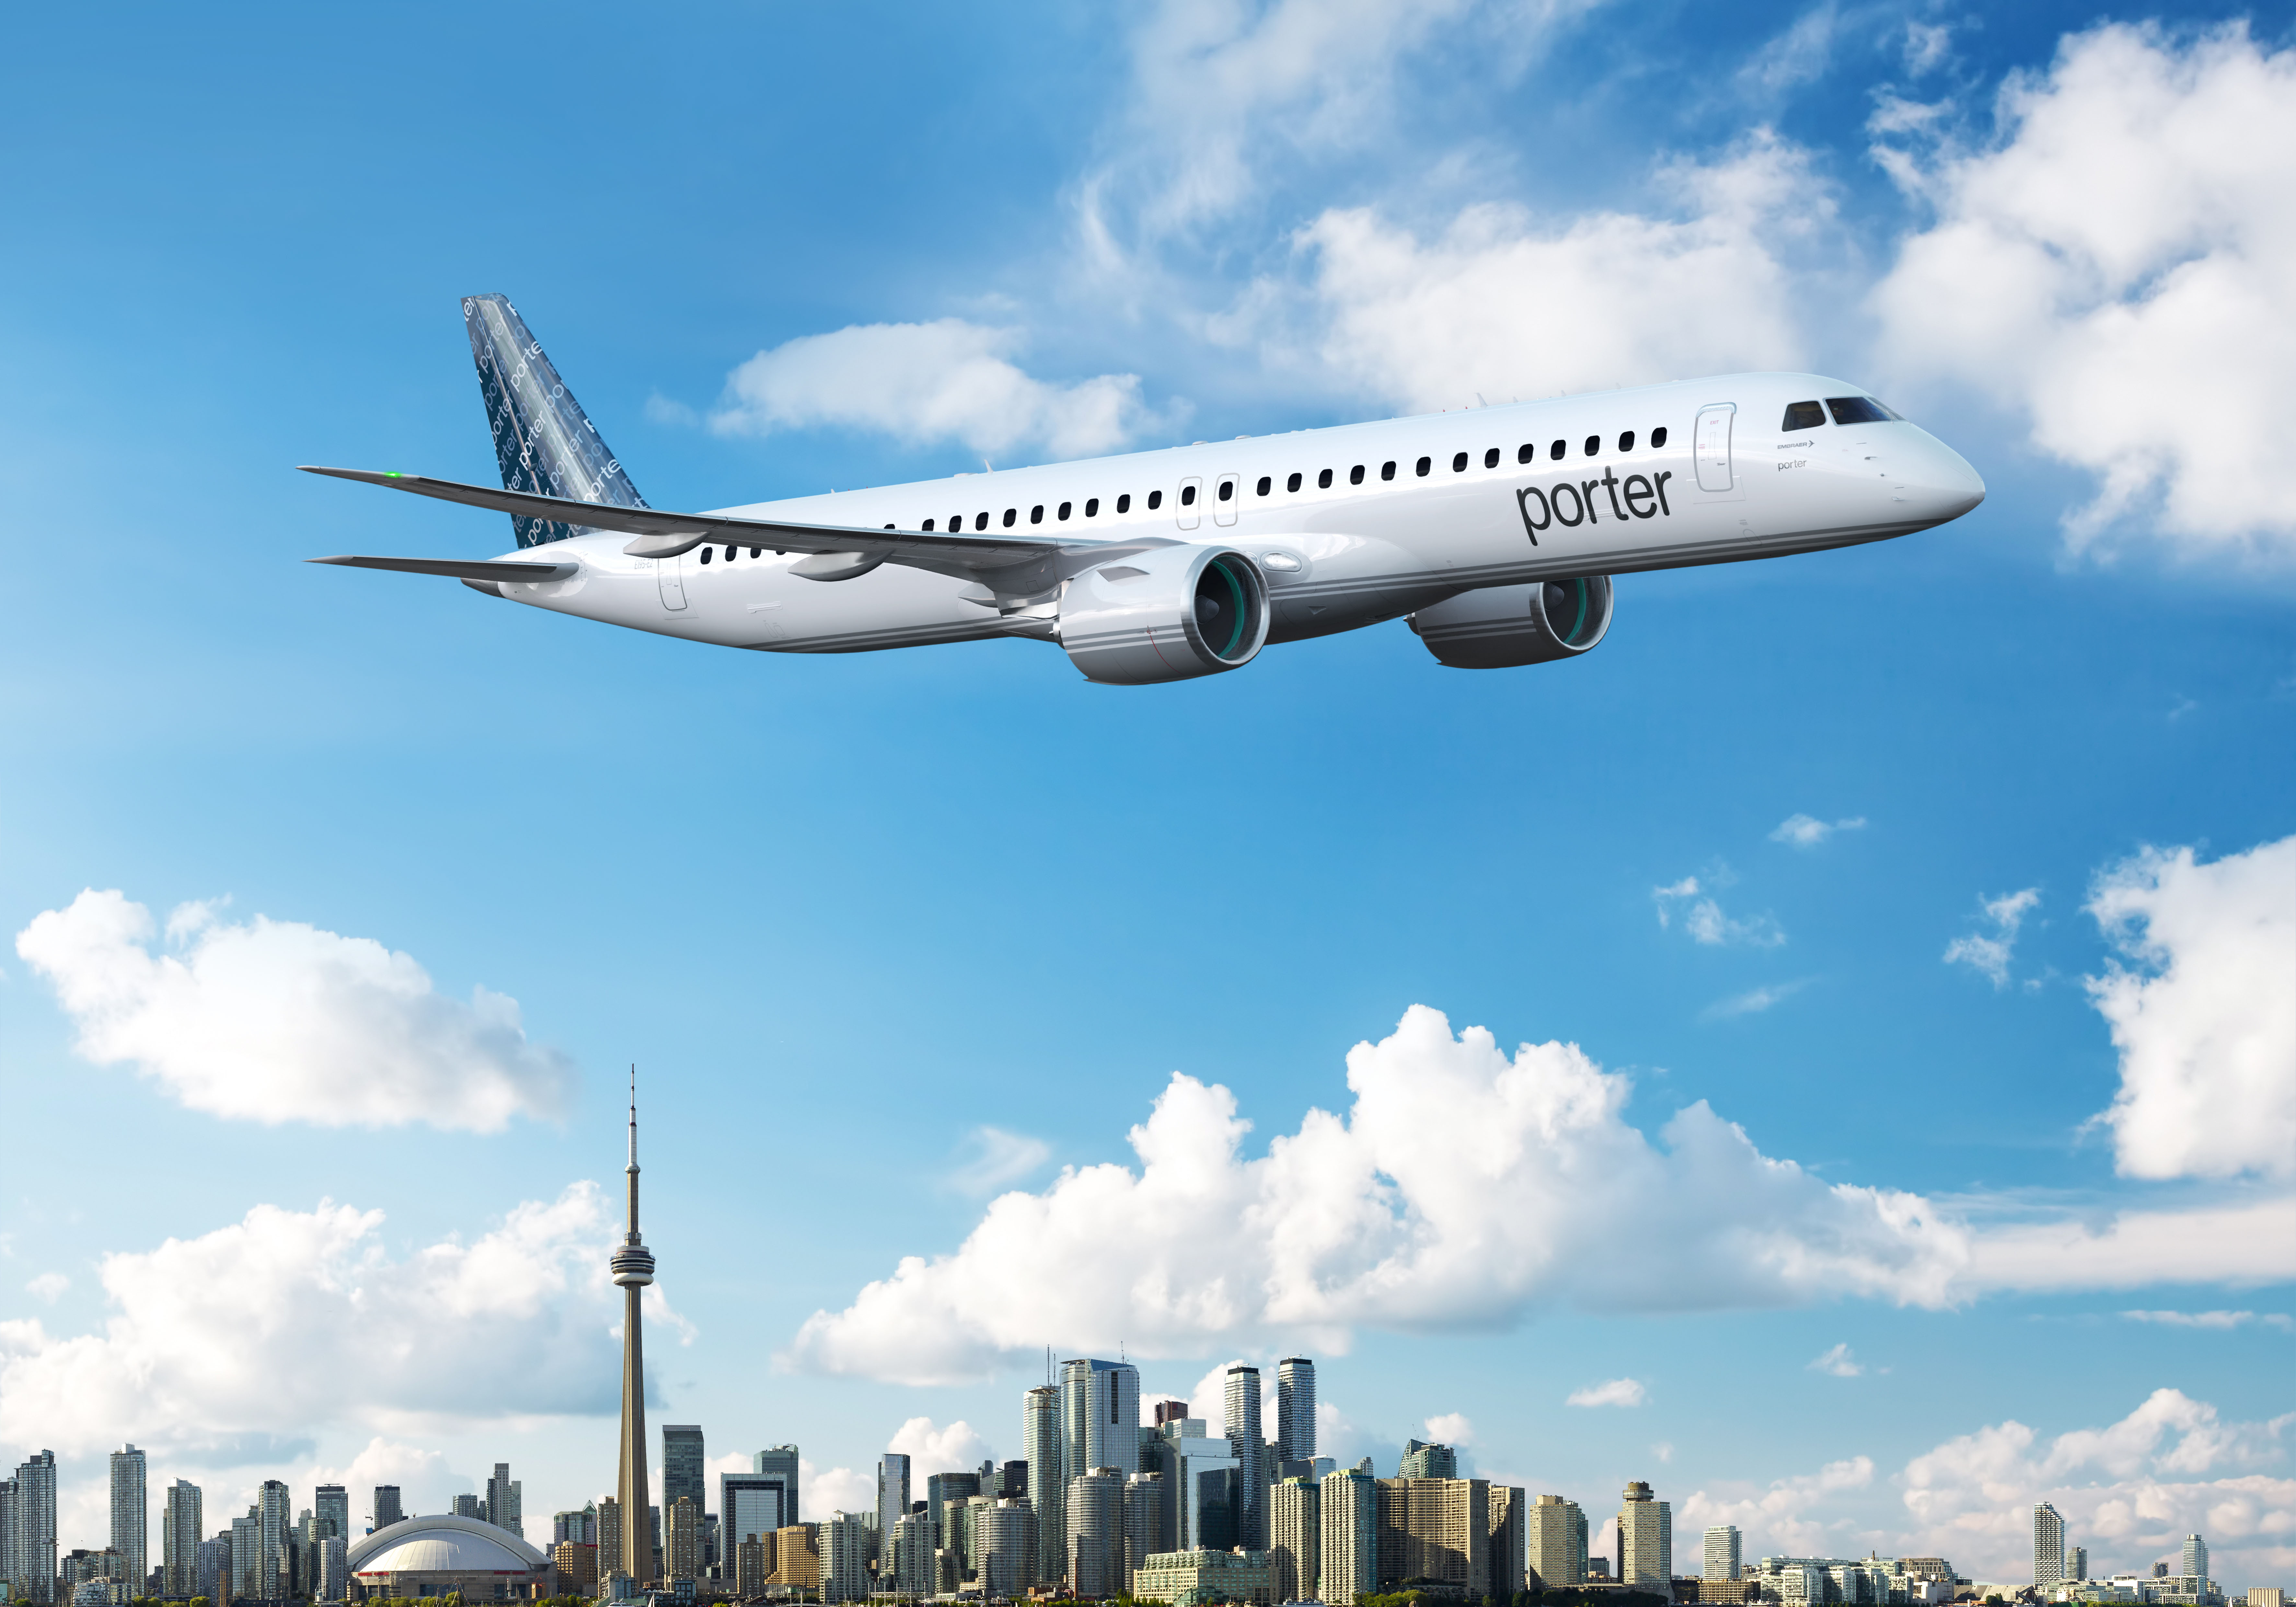 Porter Airlines takes delivery of two E195-E2 aircraft